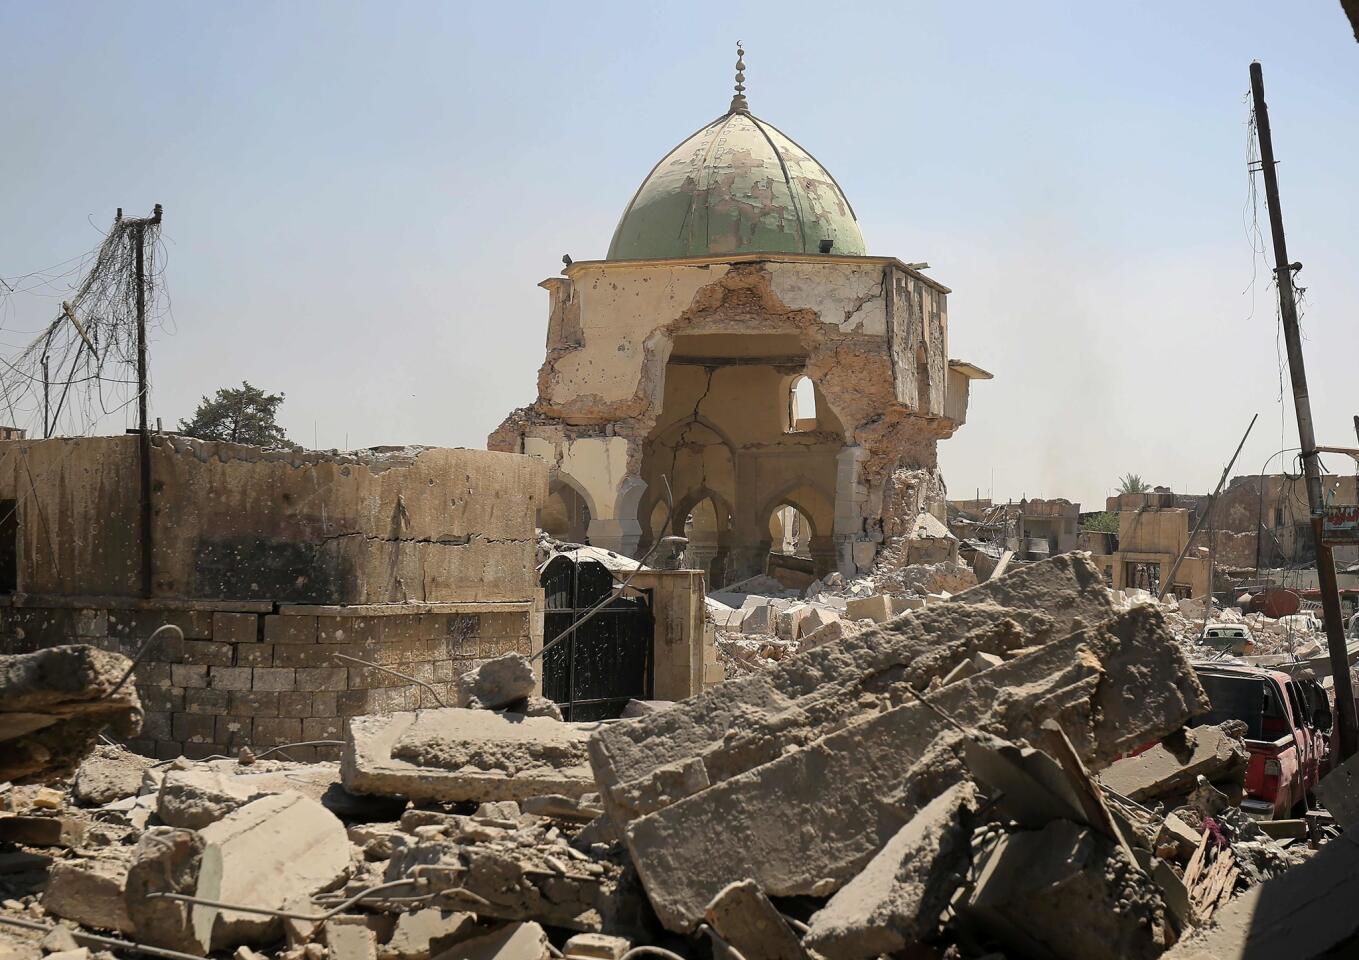 Iraqi forces capture site of Mosul's blown-up historic mosque